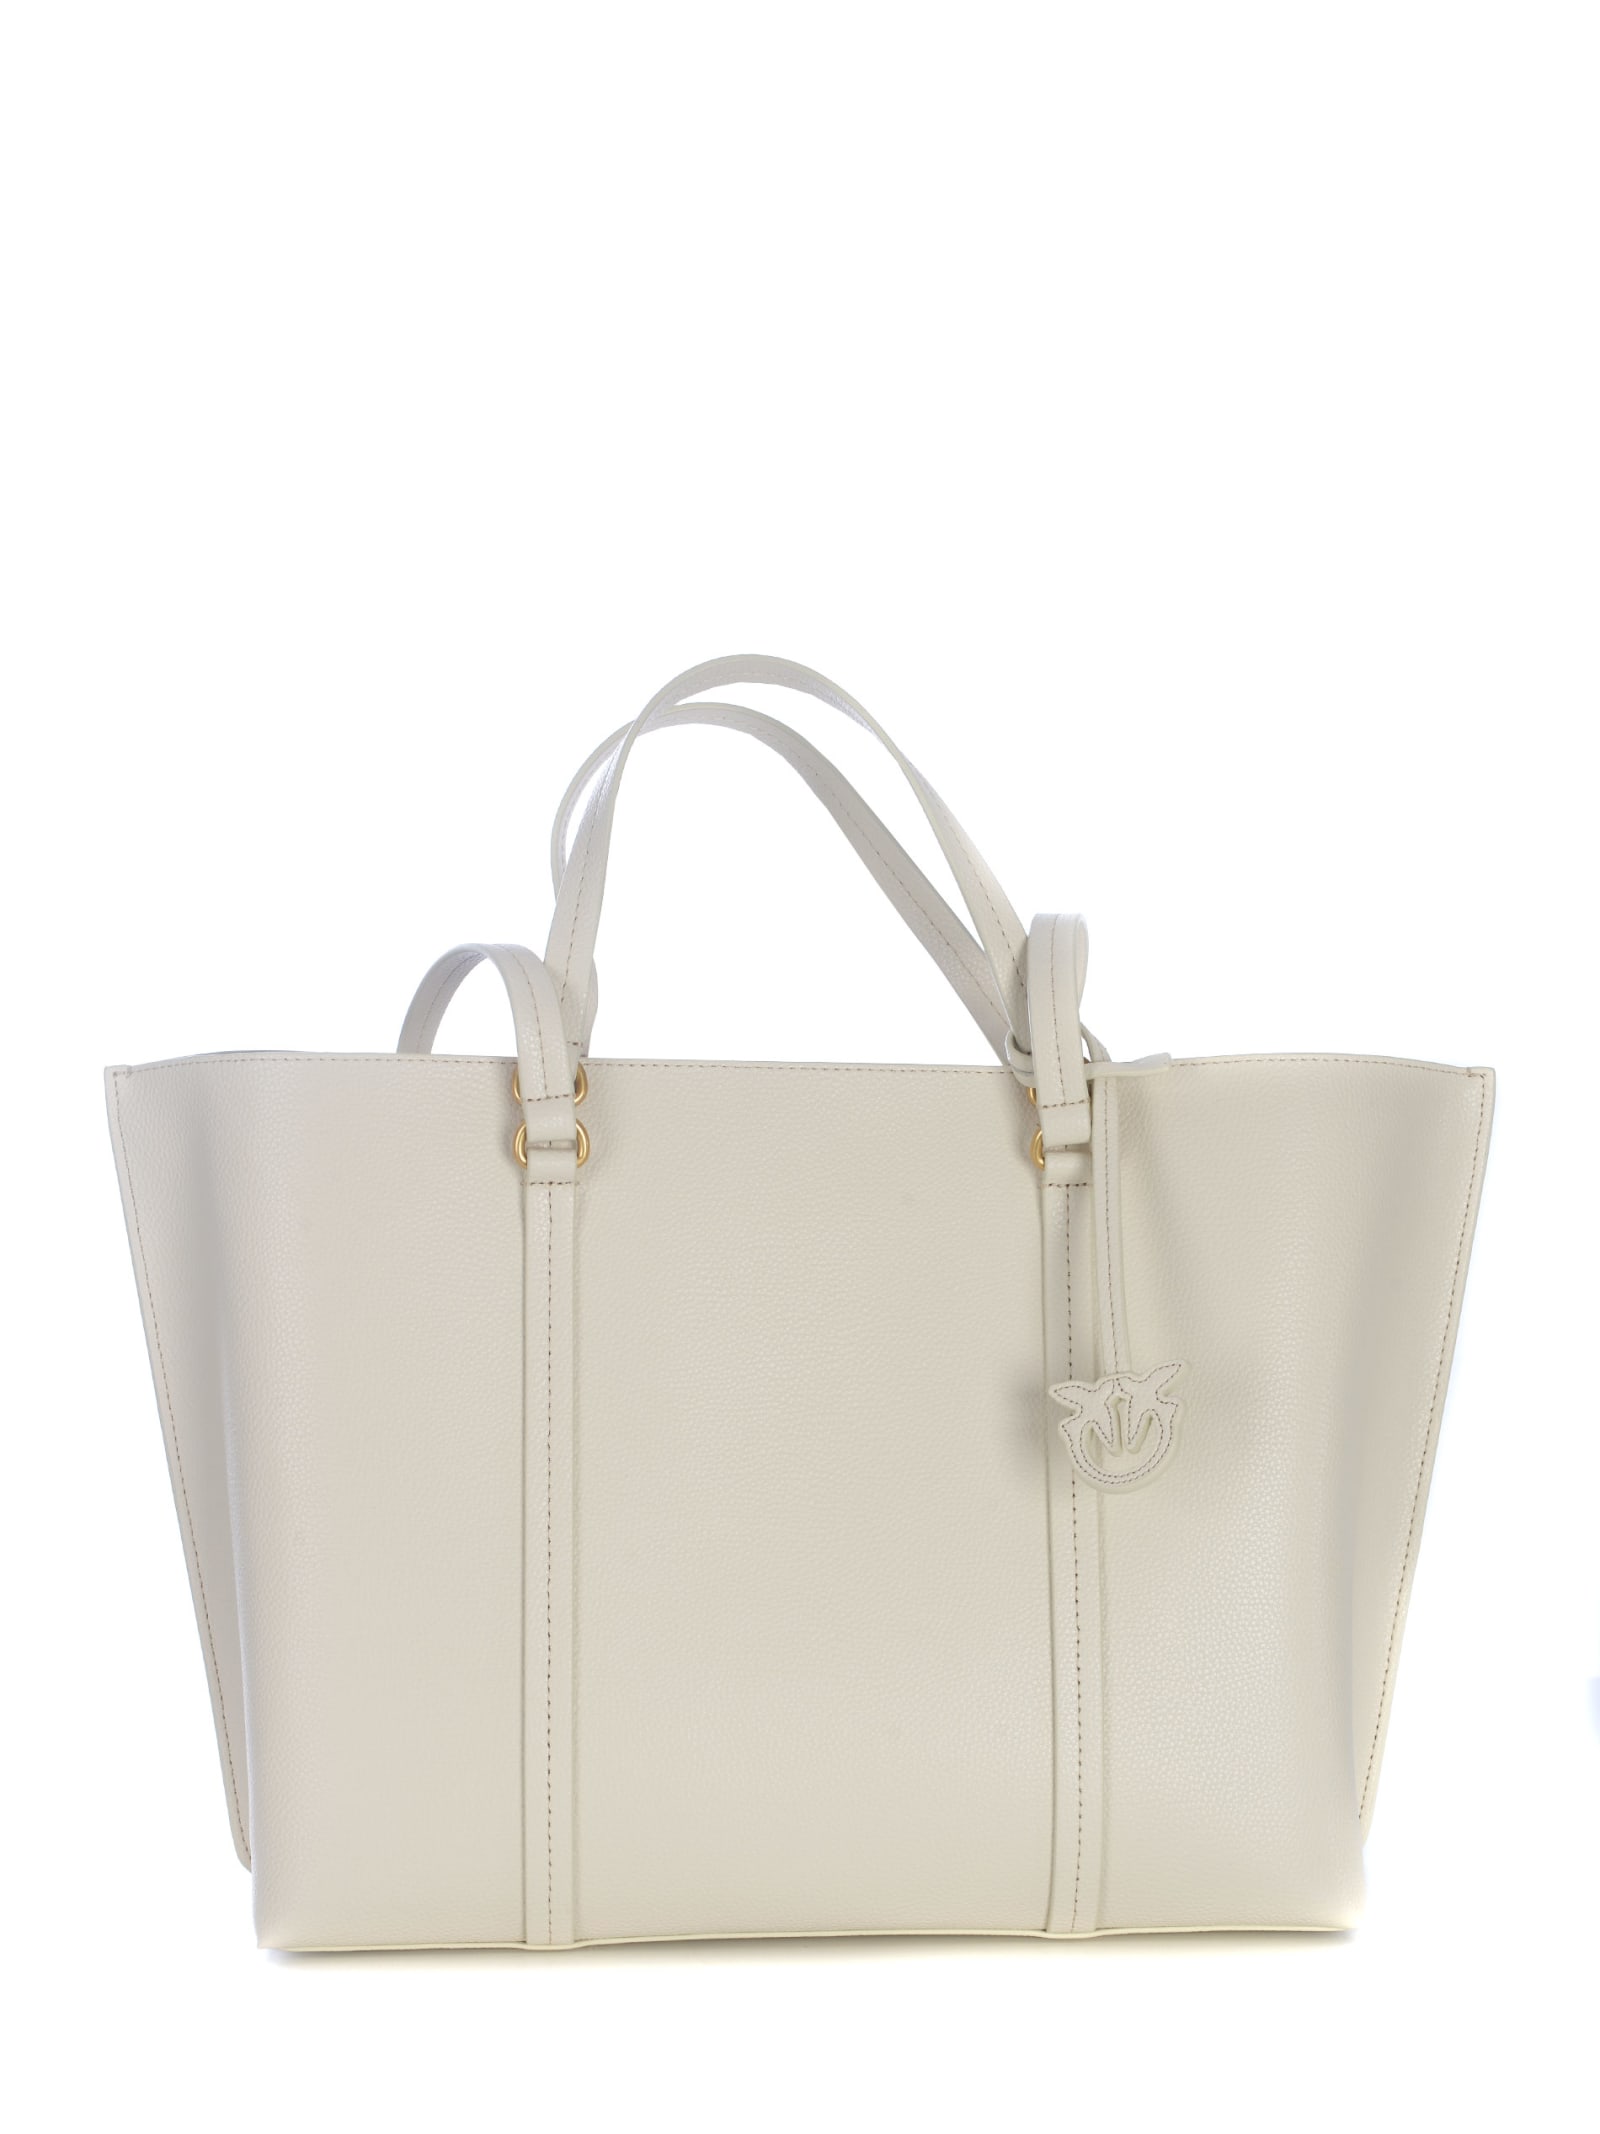 PINKO SHOPPER BAG PINKO CARRIE MADE OF TUMBLED LEATHER